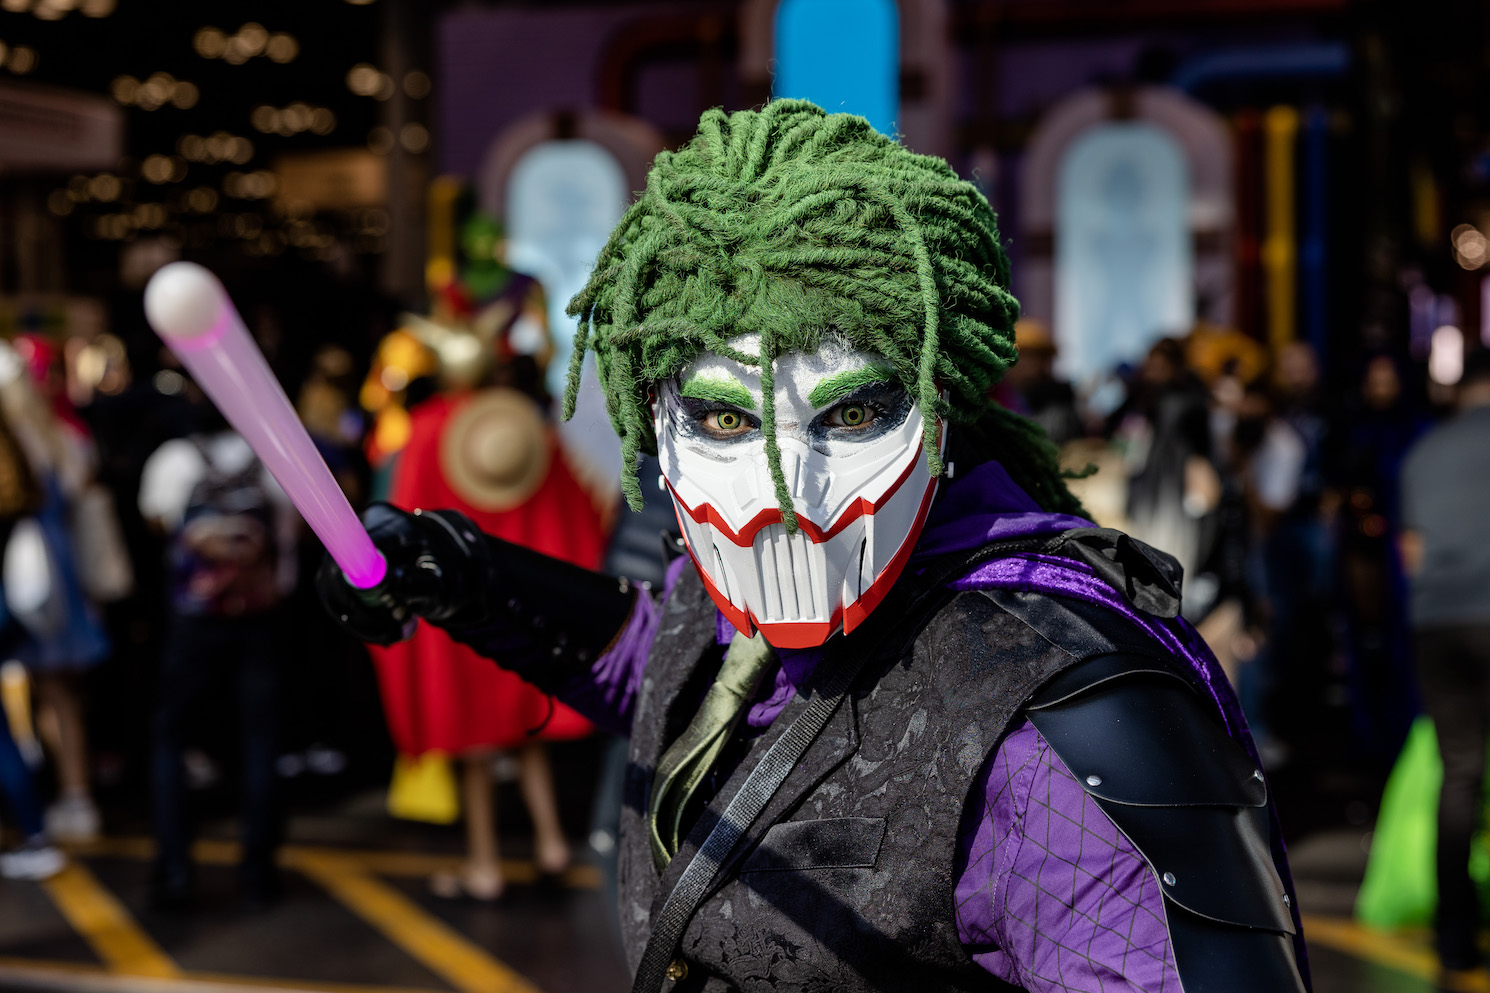 A cosplayer wearing a mechanical mask and green wig holds a purple lightsaber.